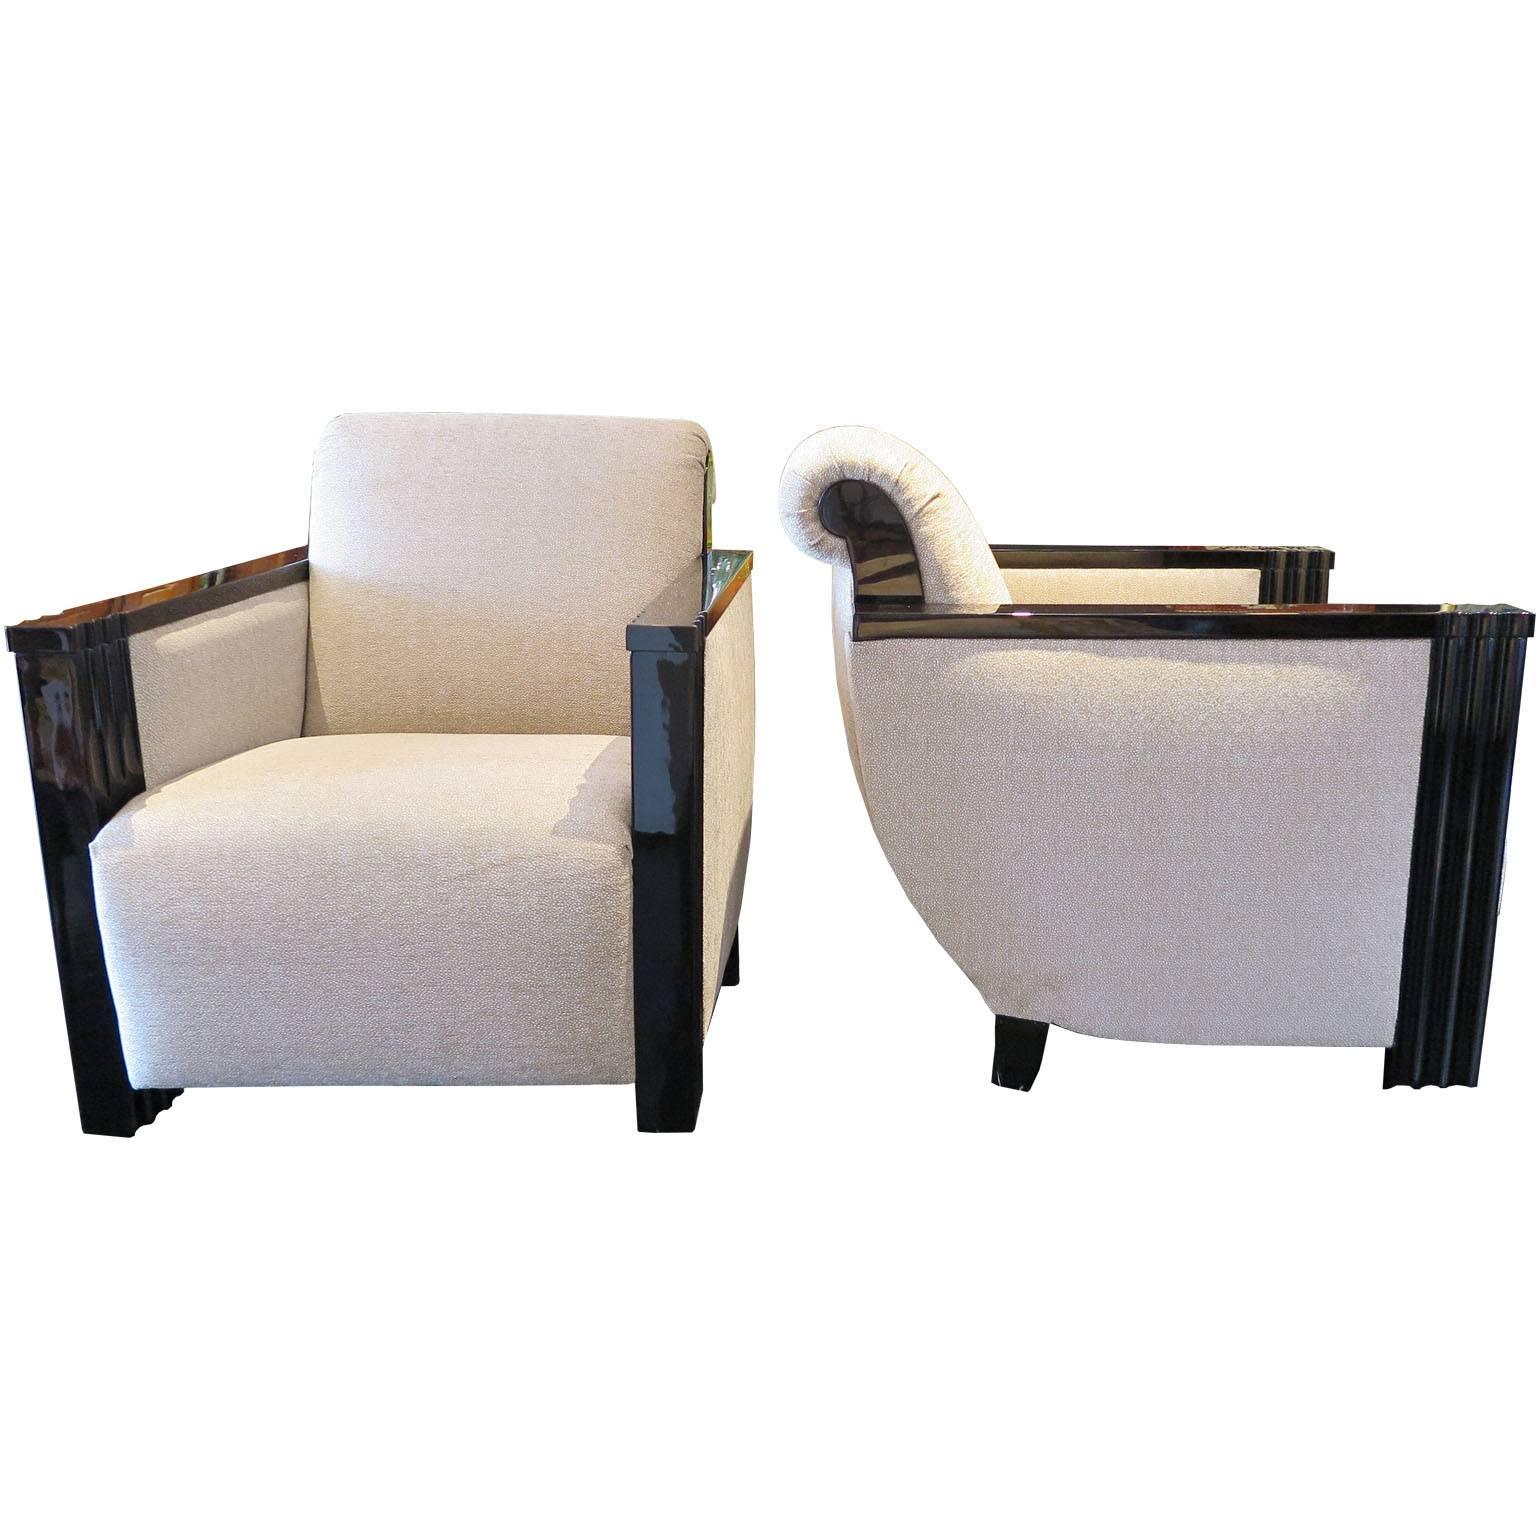 Pair of Art Deco salon chairs in dark Palisander with fluted legs and a curved back. Re-upholstered in a cotton viscose. Attributed to Christian Krass.